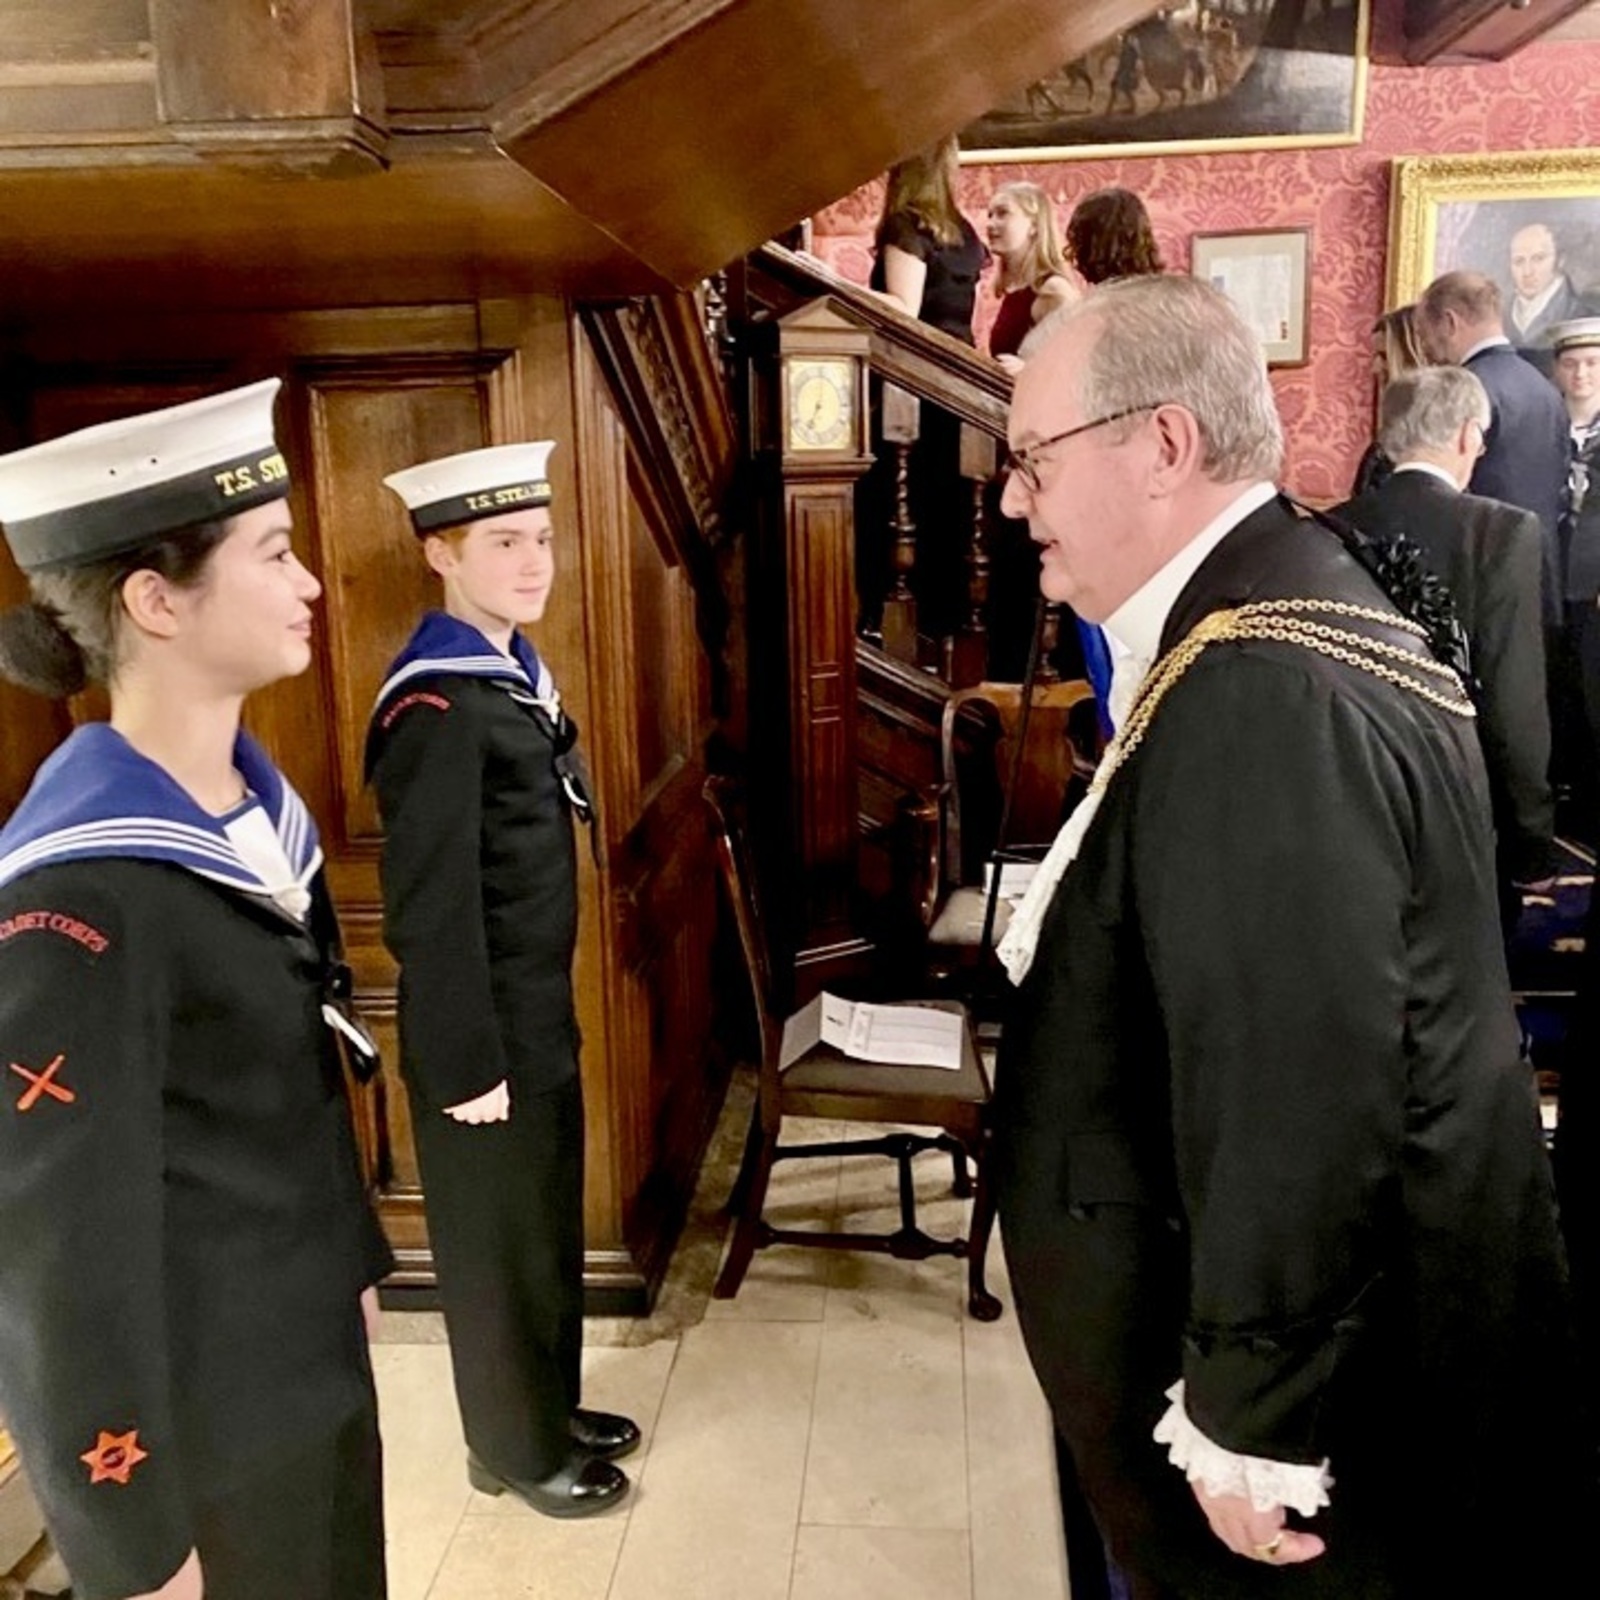 24 Oct 22 - Chatting to the splendidly turned-out carpet guard at the Management Consultant’s Dinner at Apothecarie’s Hall